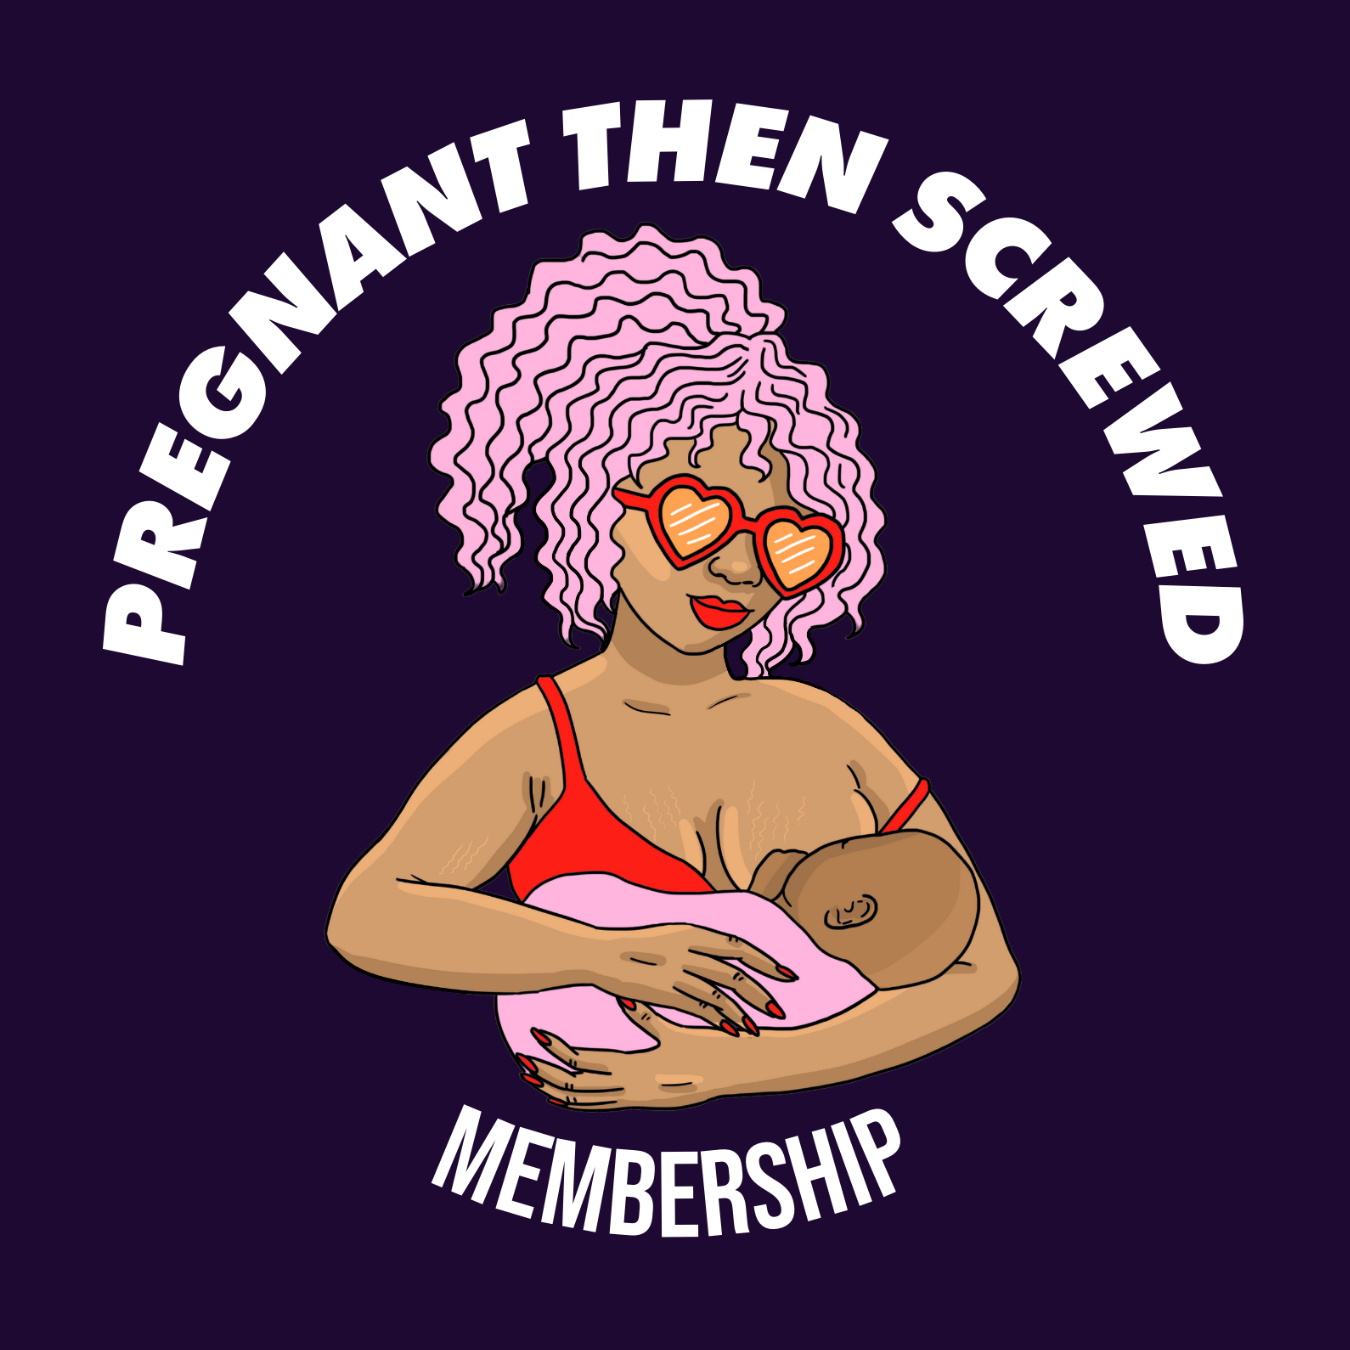 Alt text: Pregnant Then Screwed membership logo showing a woman wearing heart shaped sunglasses breastfeeding her baby